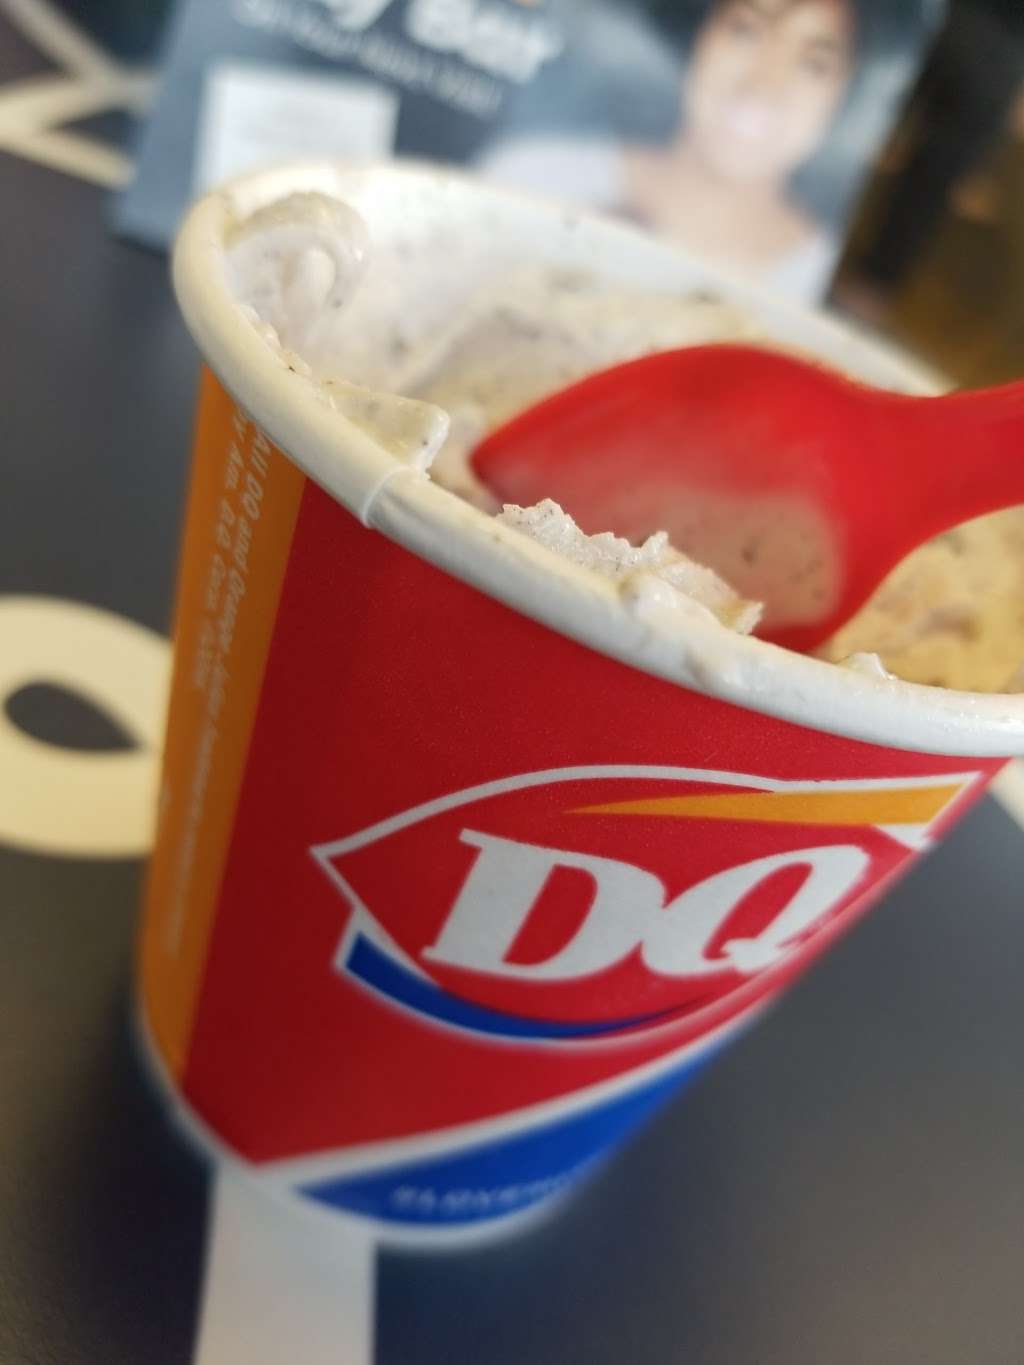 Dairy Queen (Treat) | 1010 S Union Blvd, Lakewood, CO 80228 | Phone: (303) 988-8545